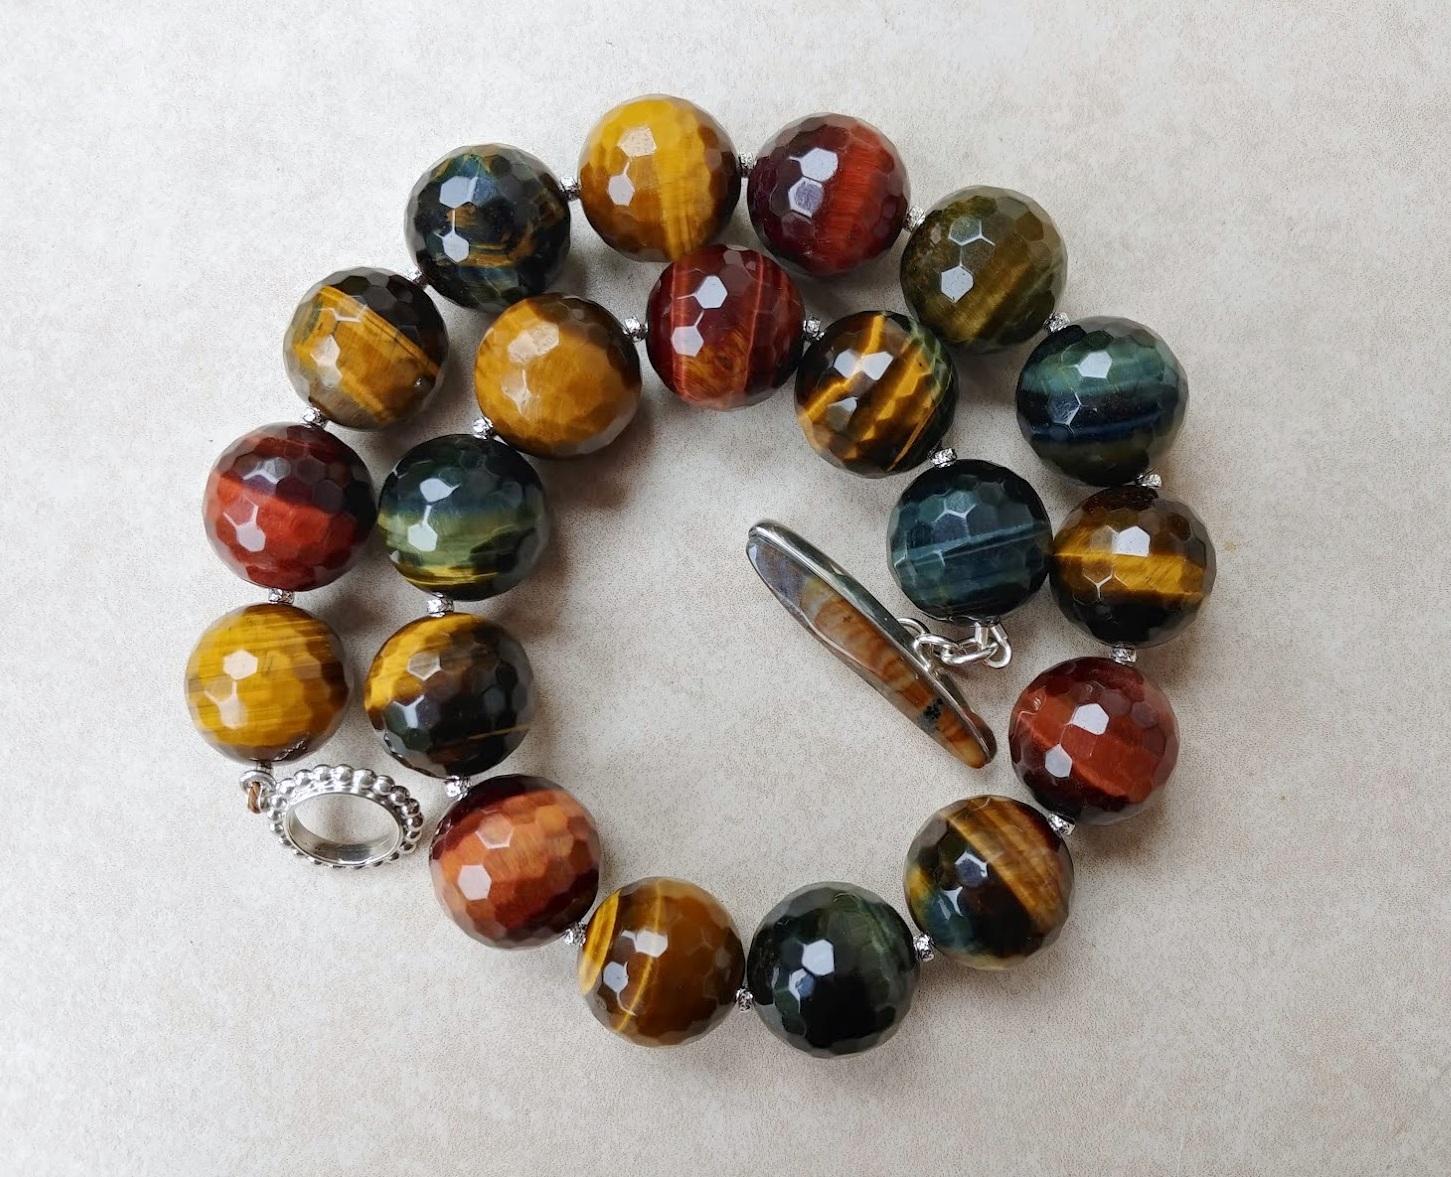 Faceted Multi-Color Tiger Eye Beaded Necklace

The length of the necklace is 18 inches (45.7 cm). The size of the faceted round beads is 20 mm.
The tones of the beads are a wondrous golden brown, caramel gold, silky red, and sparkly gold blue are so